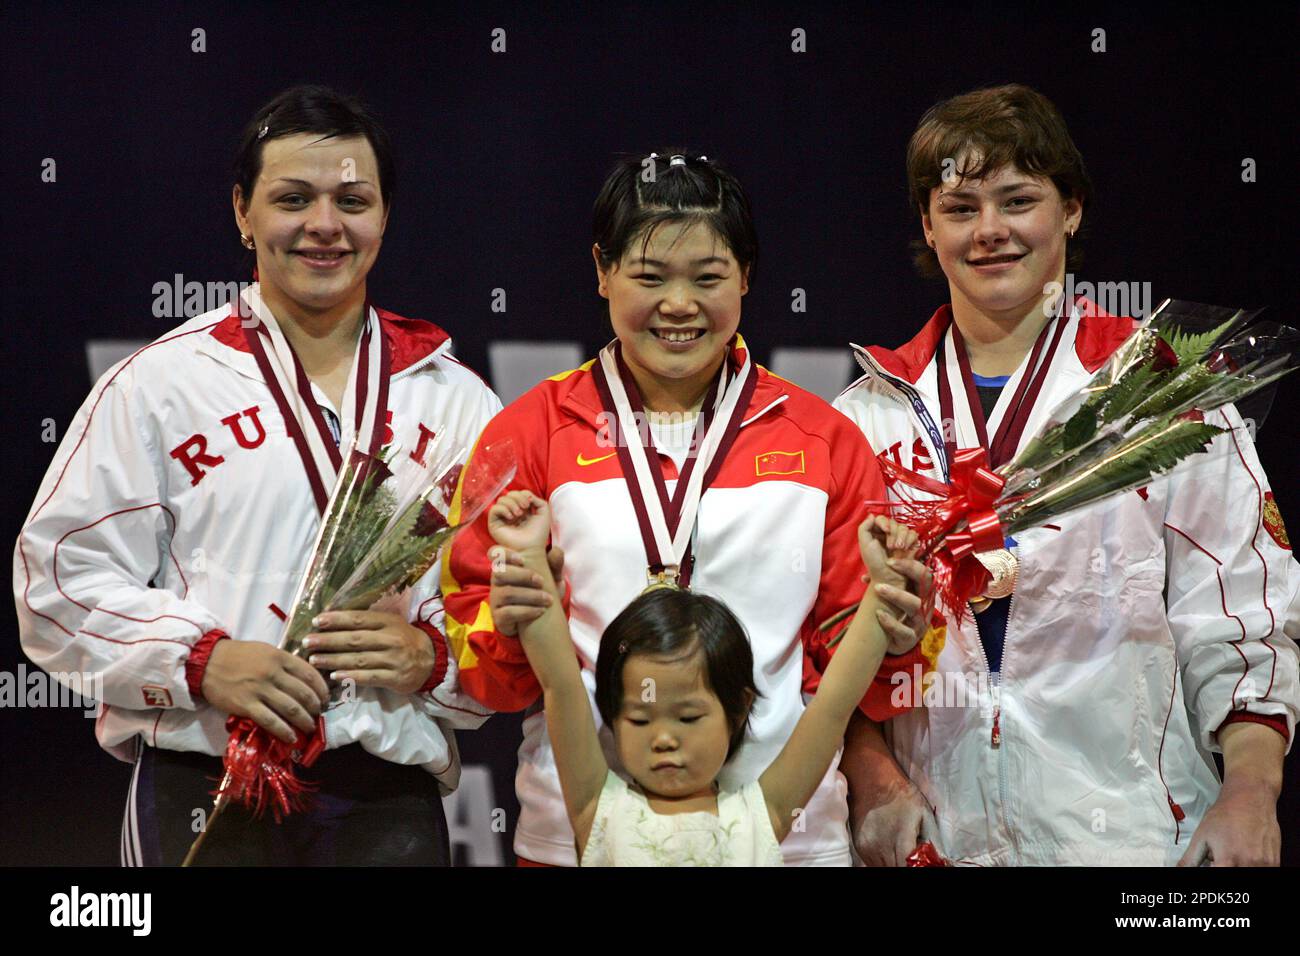 From left to right: Russia's Svetlana Podobedova, silver medalist, China's  Chunhong Liu, gold medalist and Natalia Zabolotnaya, bronze medalist from  Russia celebrate after receive their clean and jerk catagory medals of  women's